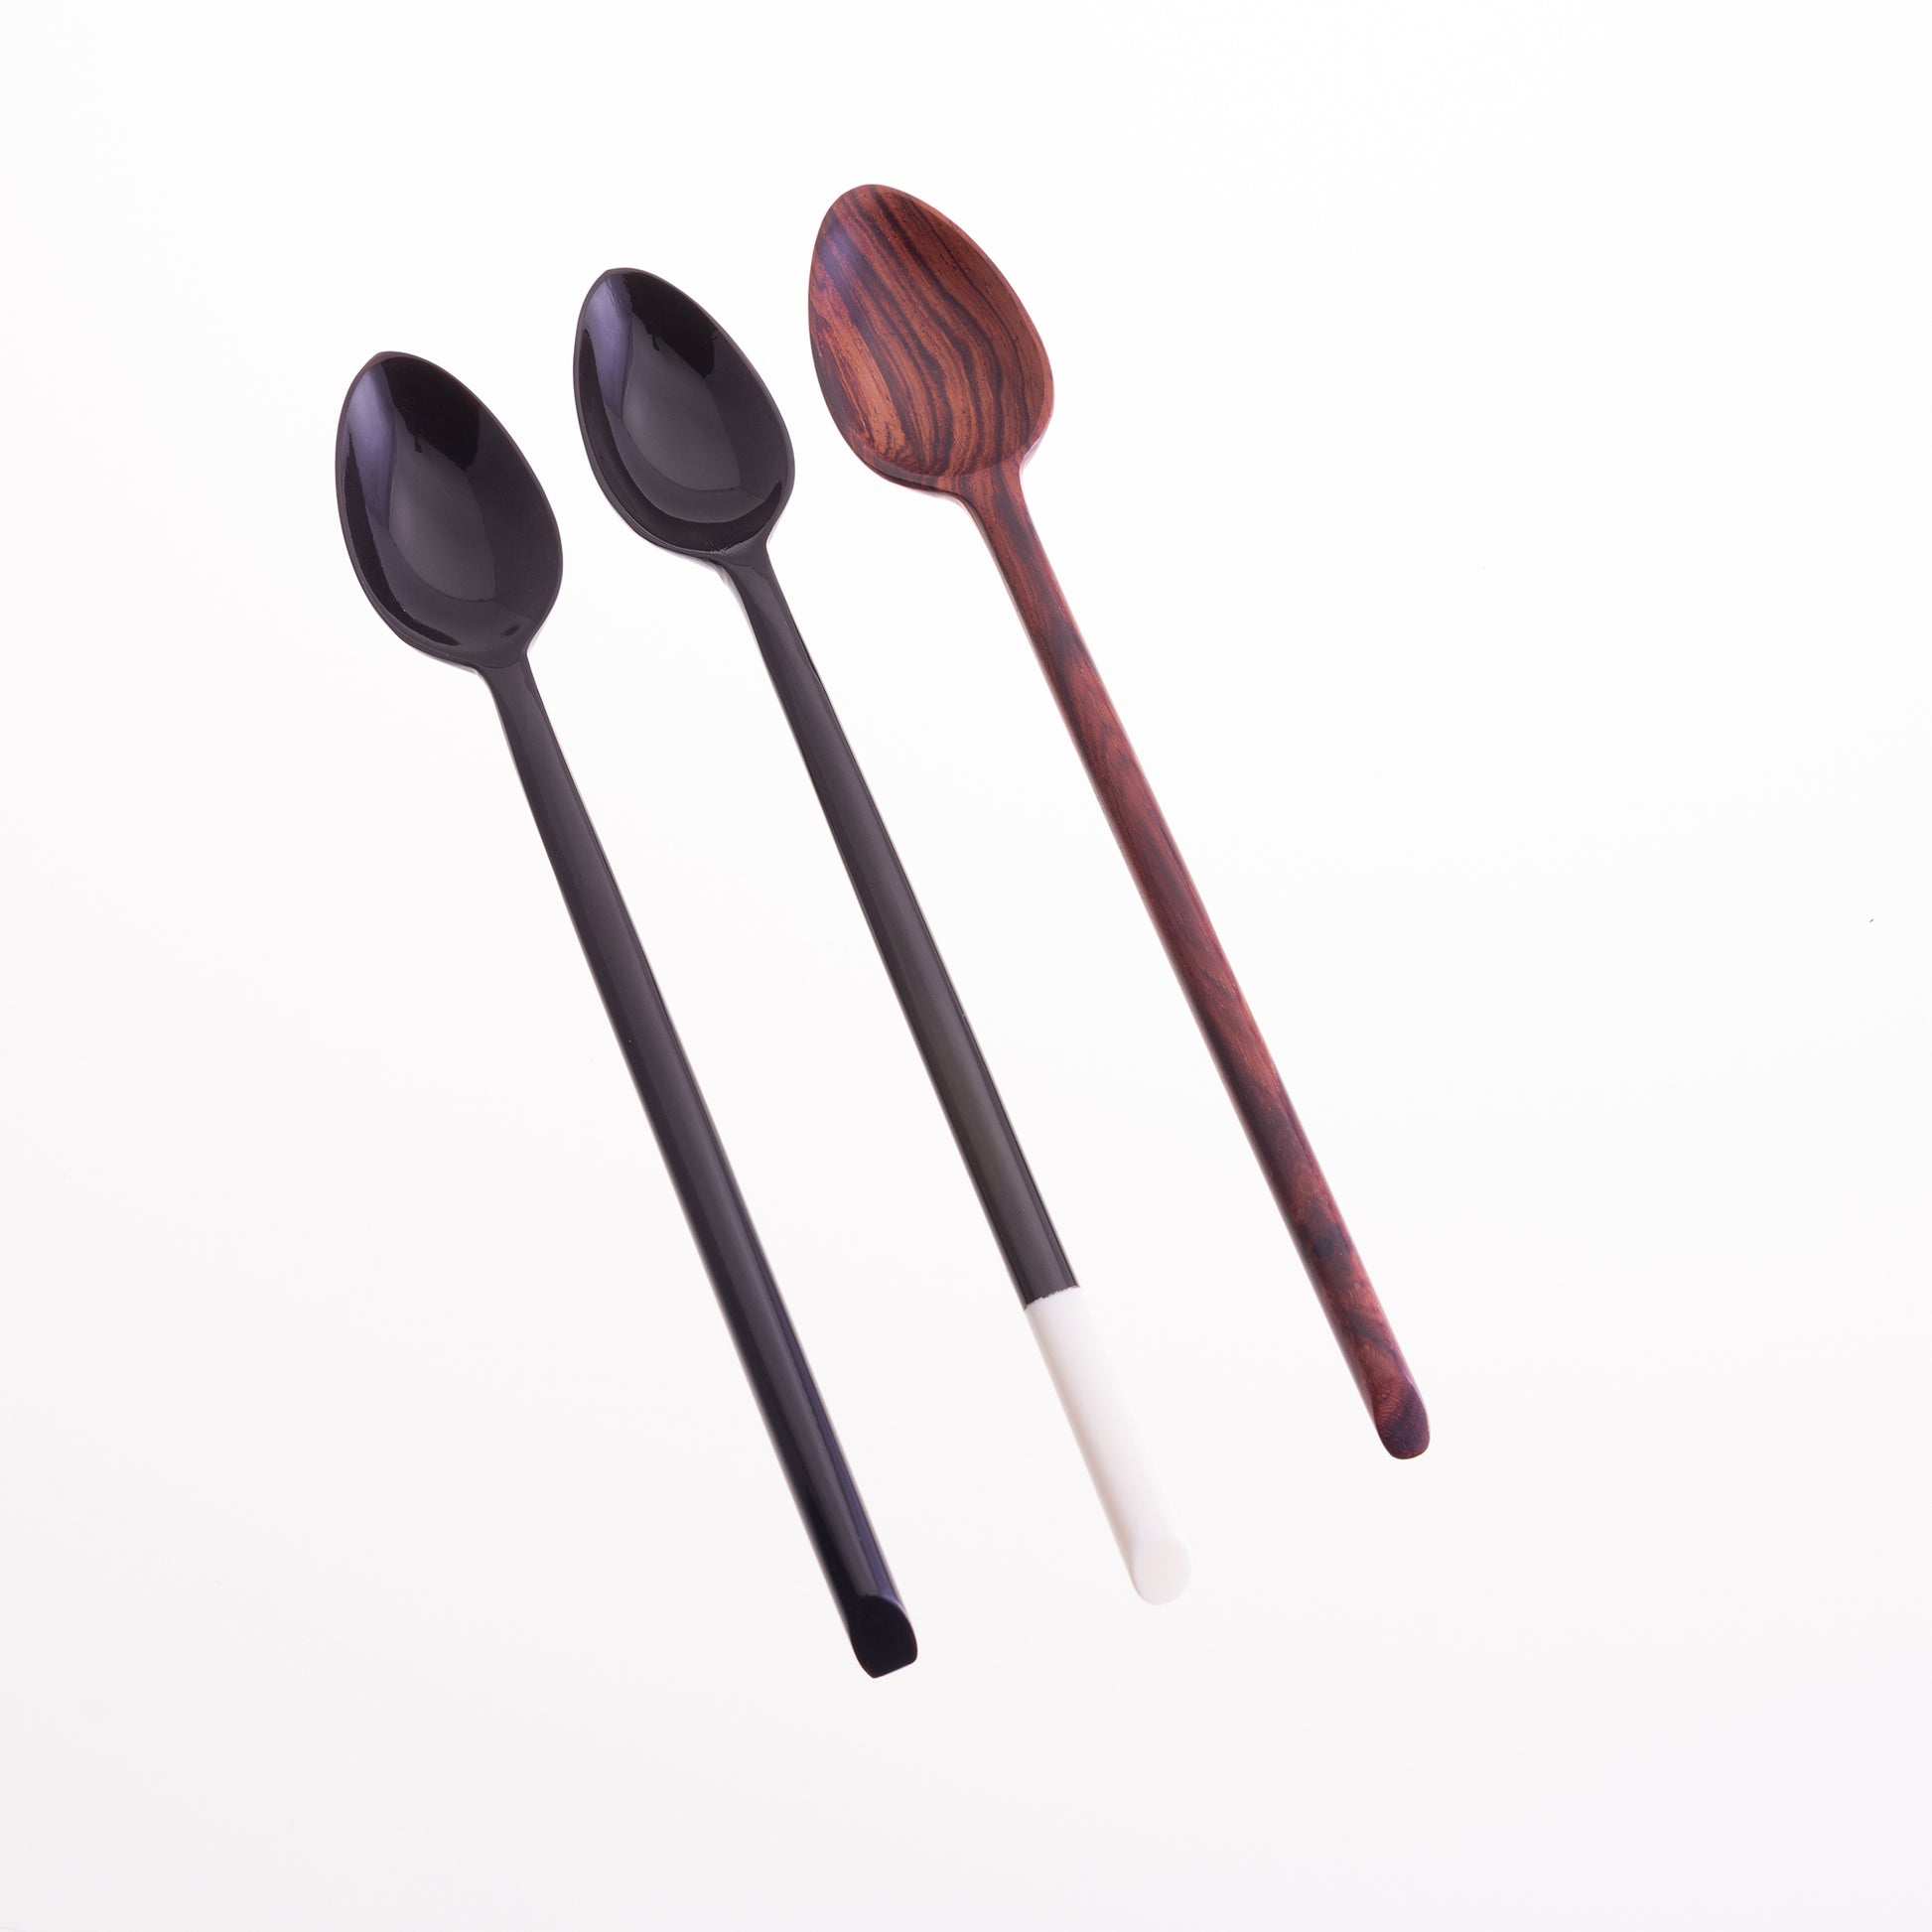 A set of 3 long handled jam spoons. The first is black horn, the second is black horn with a bone tip and the third is rosewood